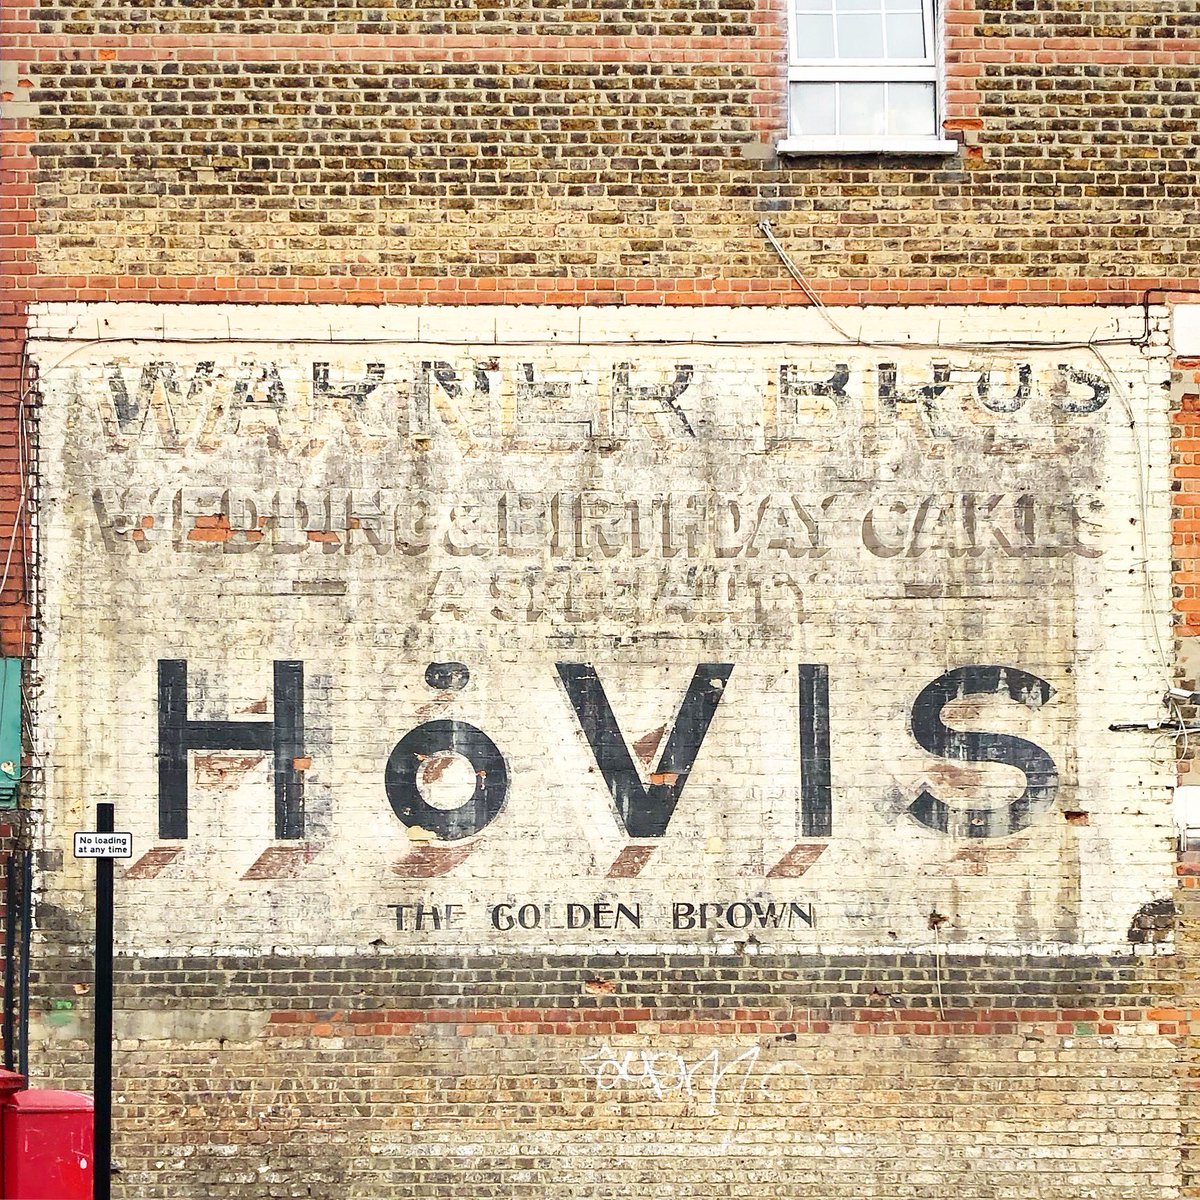 Ghost sign in Catford 👻 
.

#ghostsigns #lewisham #catford #signs #signage #signspotting #design #type #typography #graphicdesign #signwriting #lettering #traditional #craft #nothingisordinary #inspiration